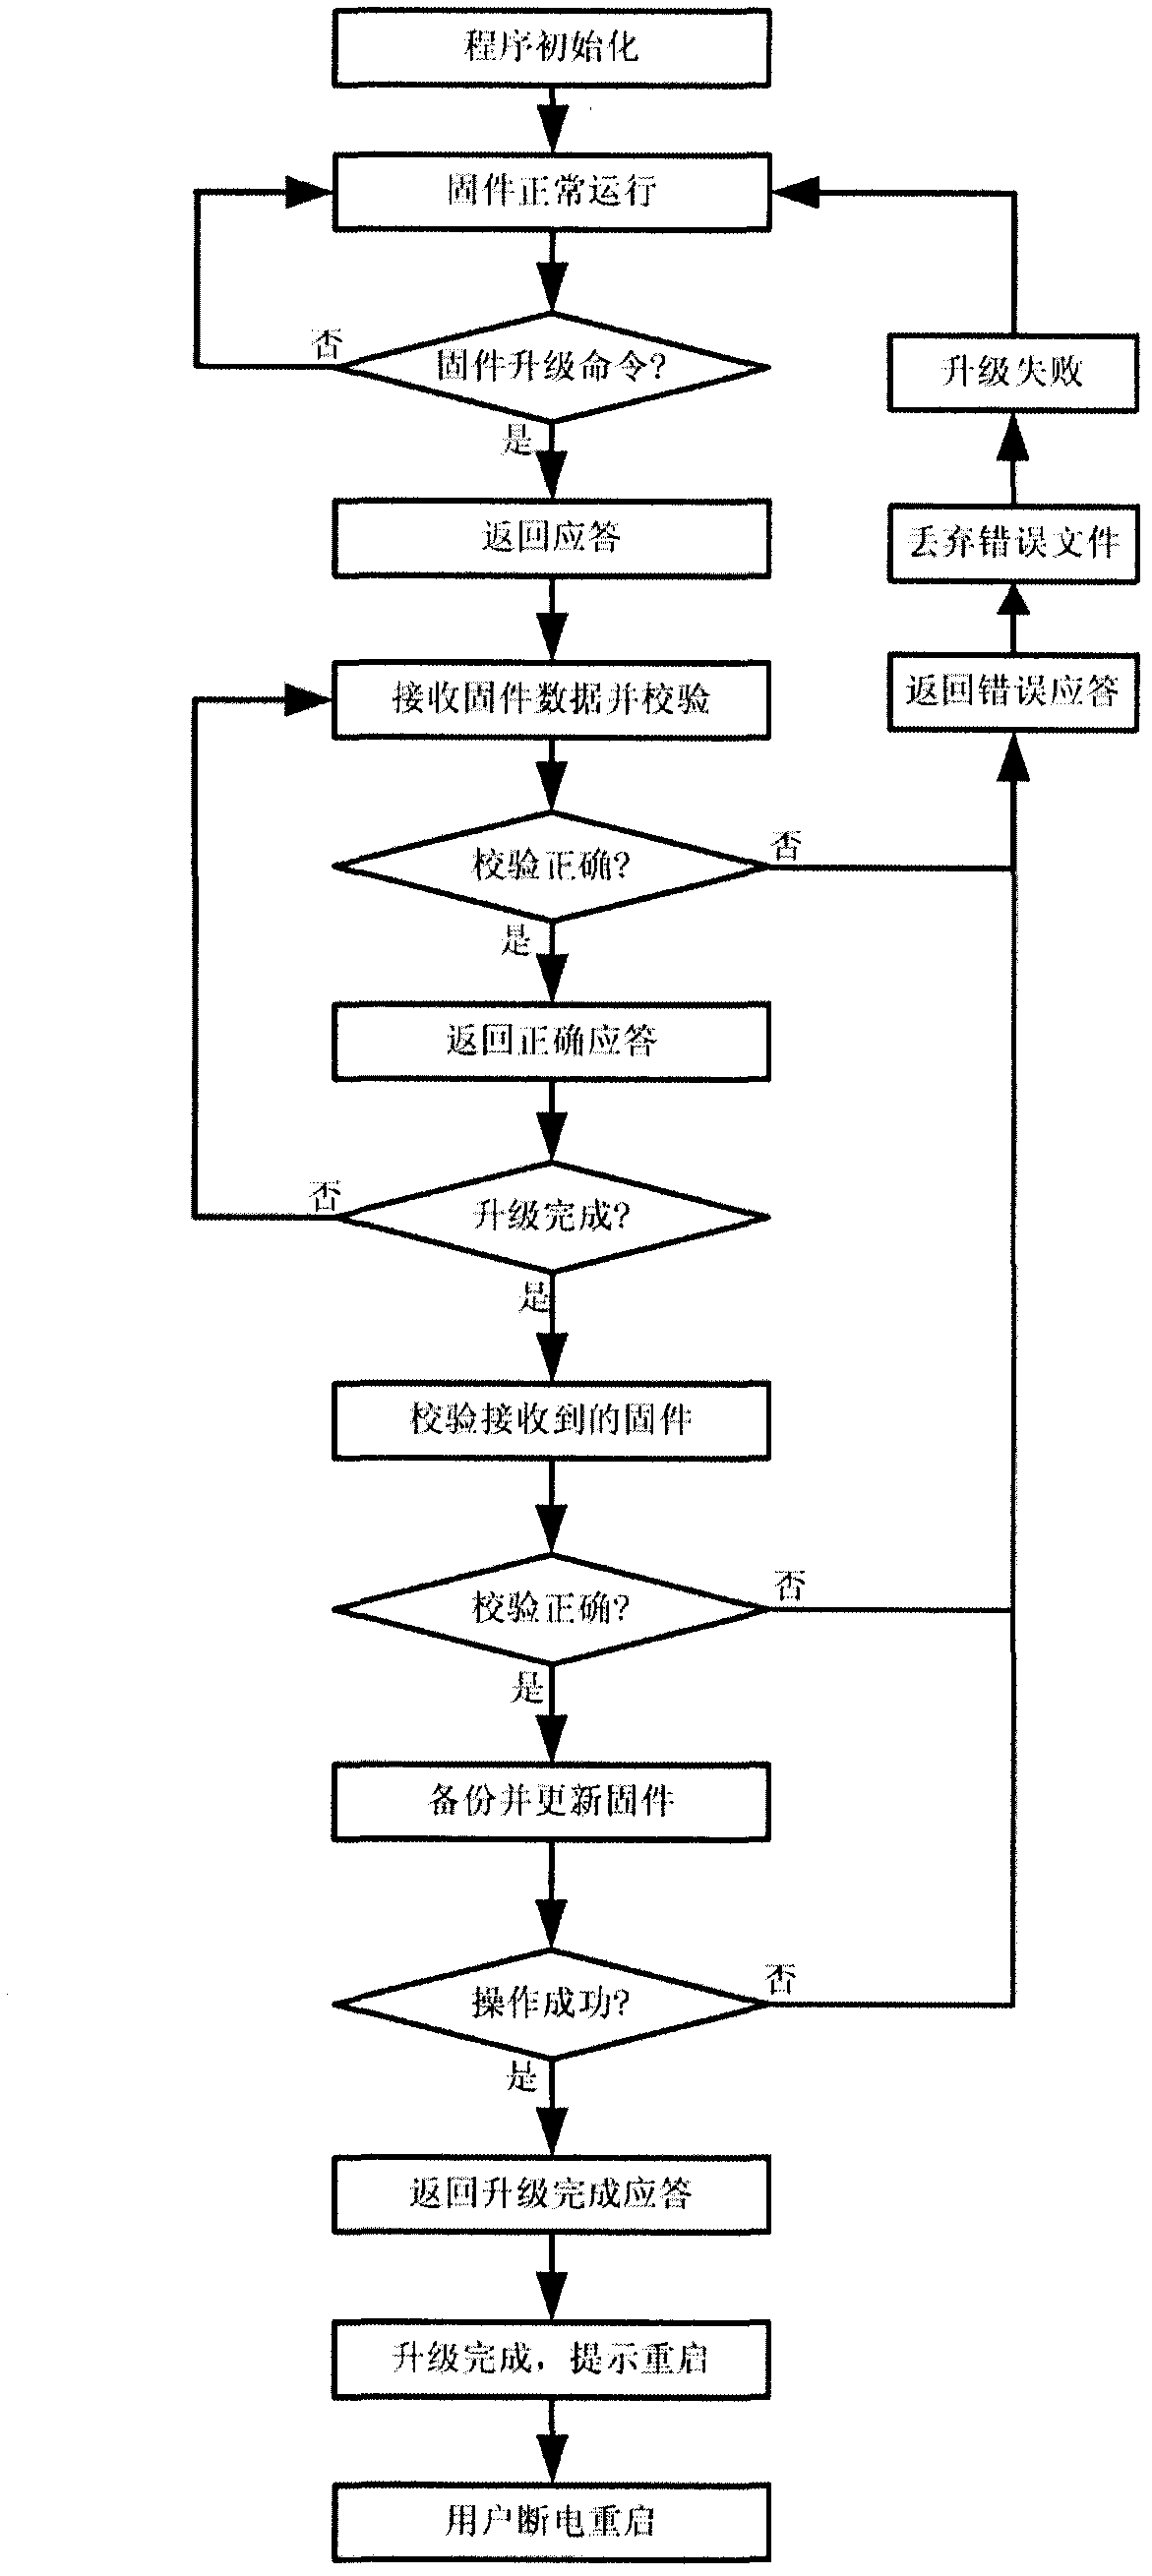 Firmware upgrading system based on communication interfaces